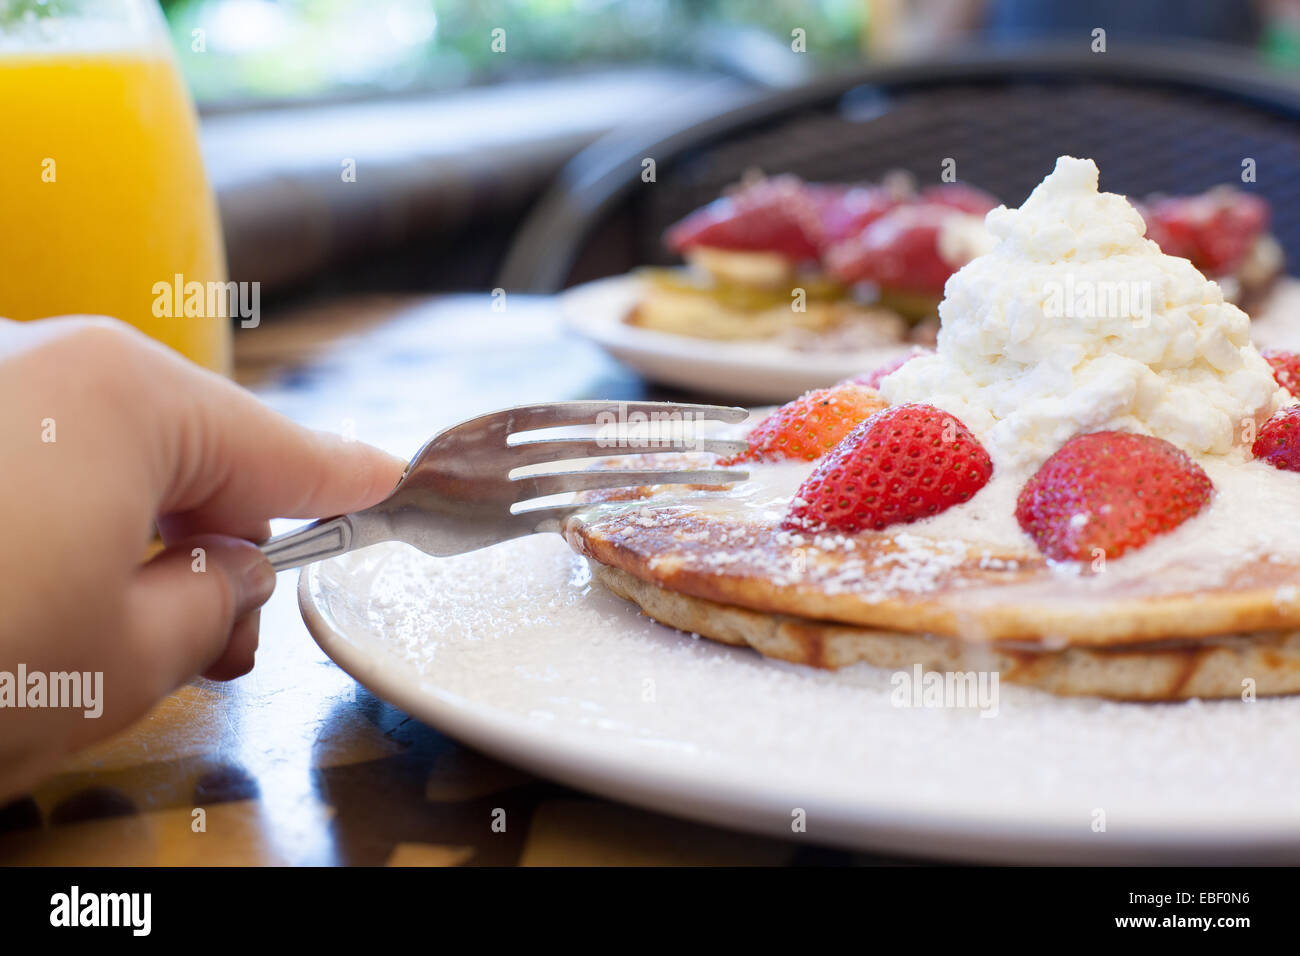 Hand cutting strawberry pancakes with fork Stock Photo